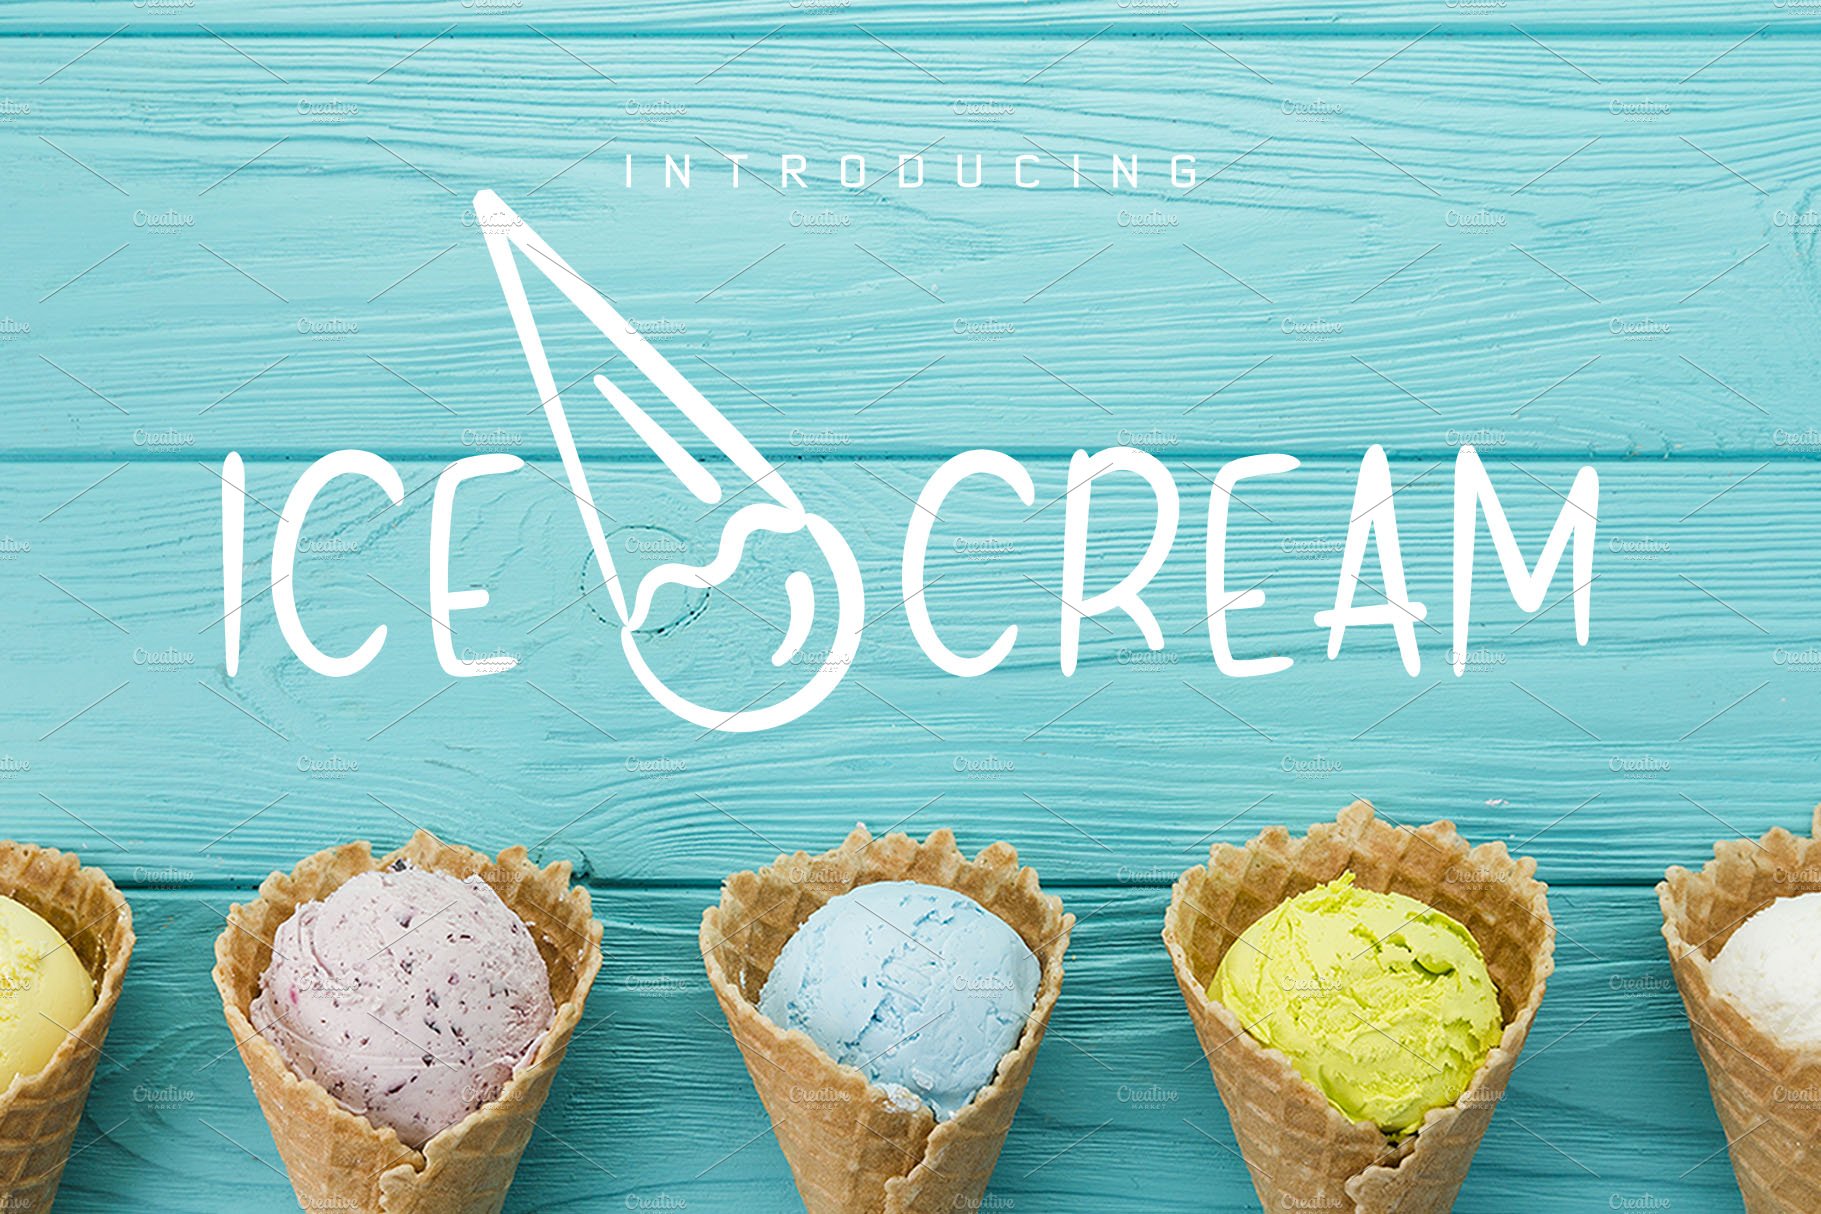 Ice Cream Font and Graphics Pack cover image.